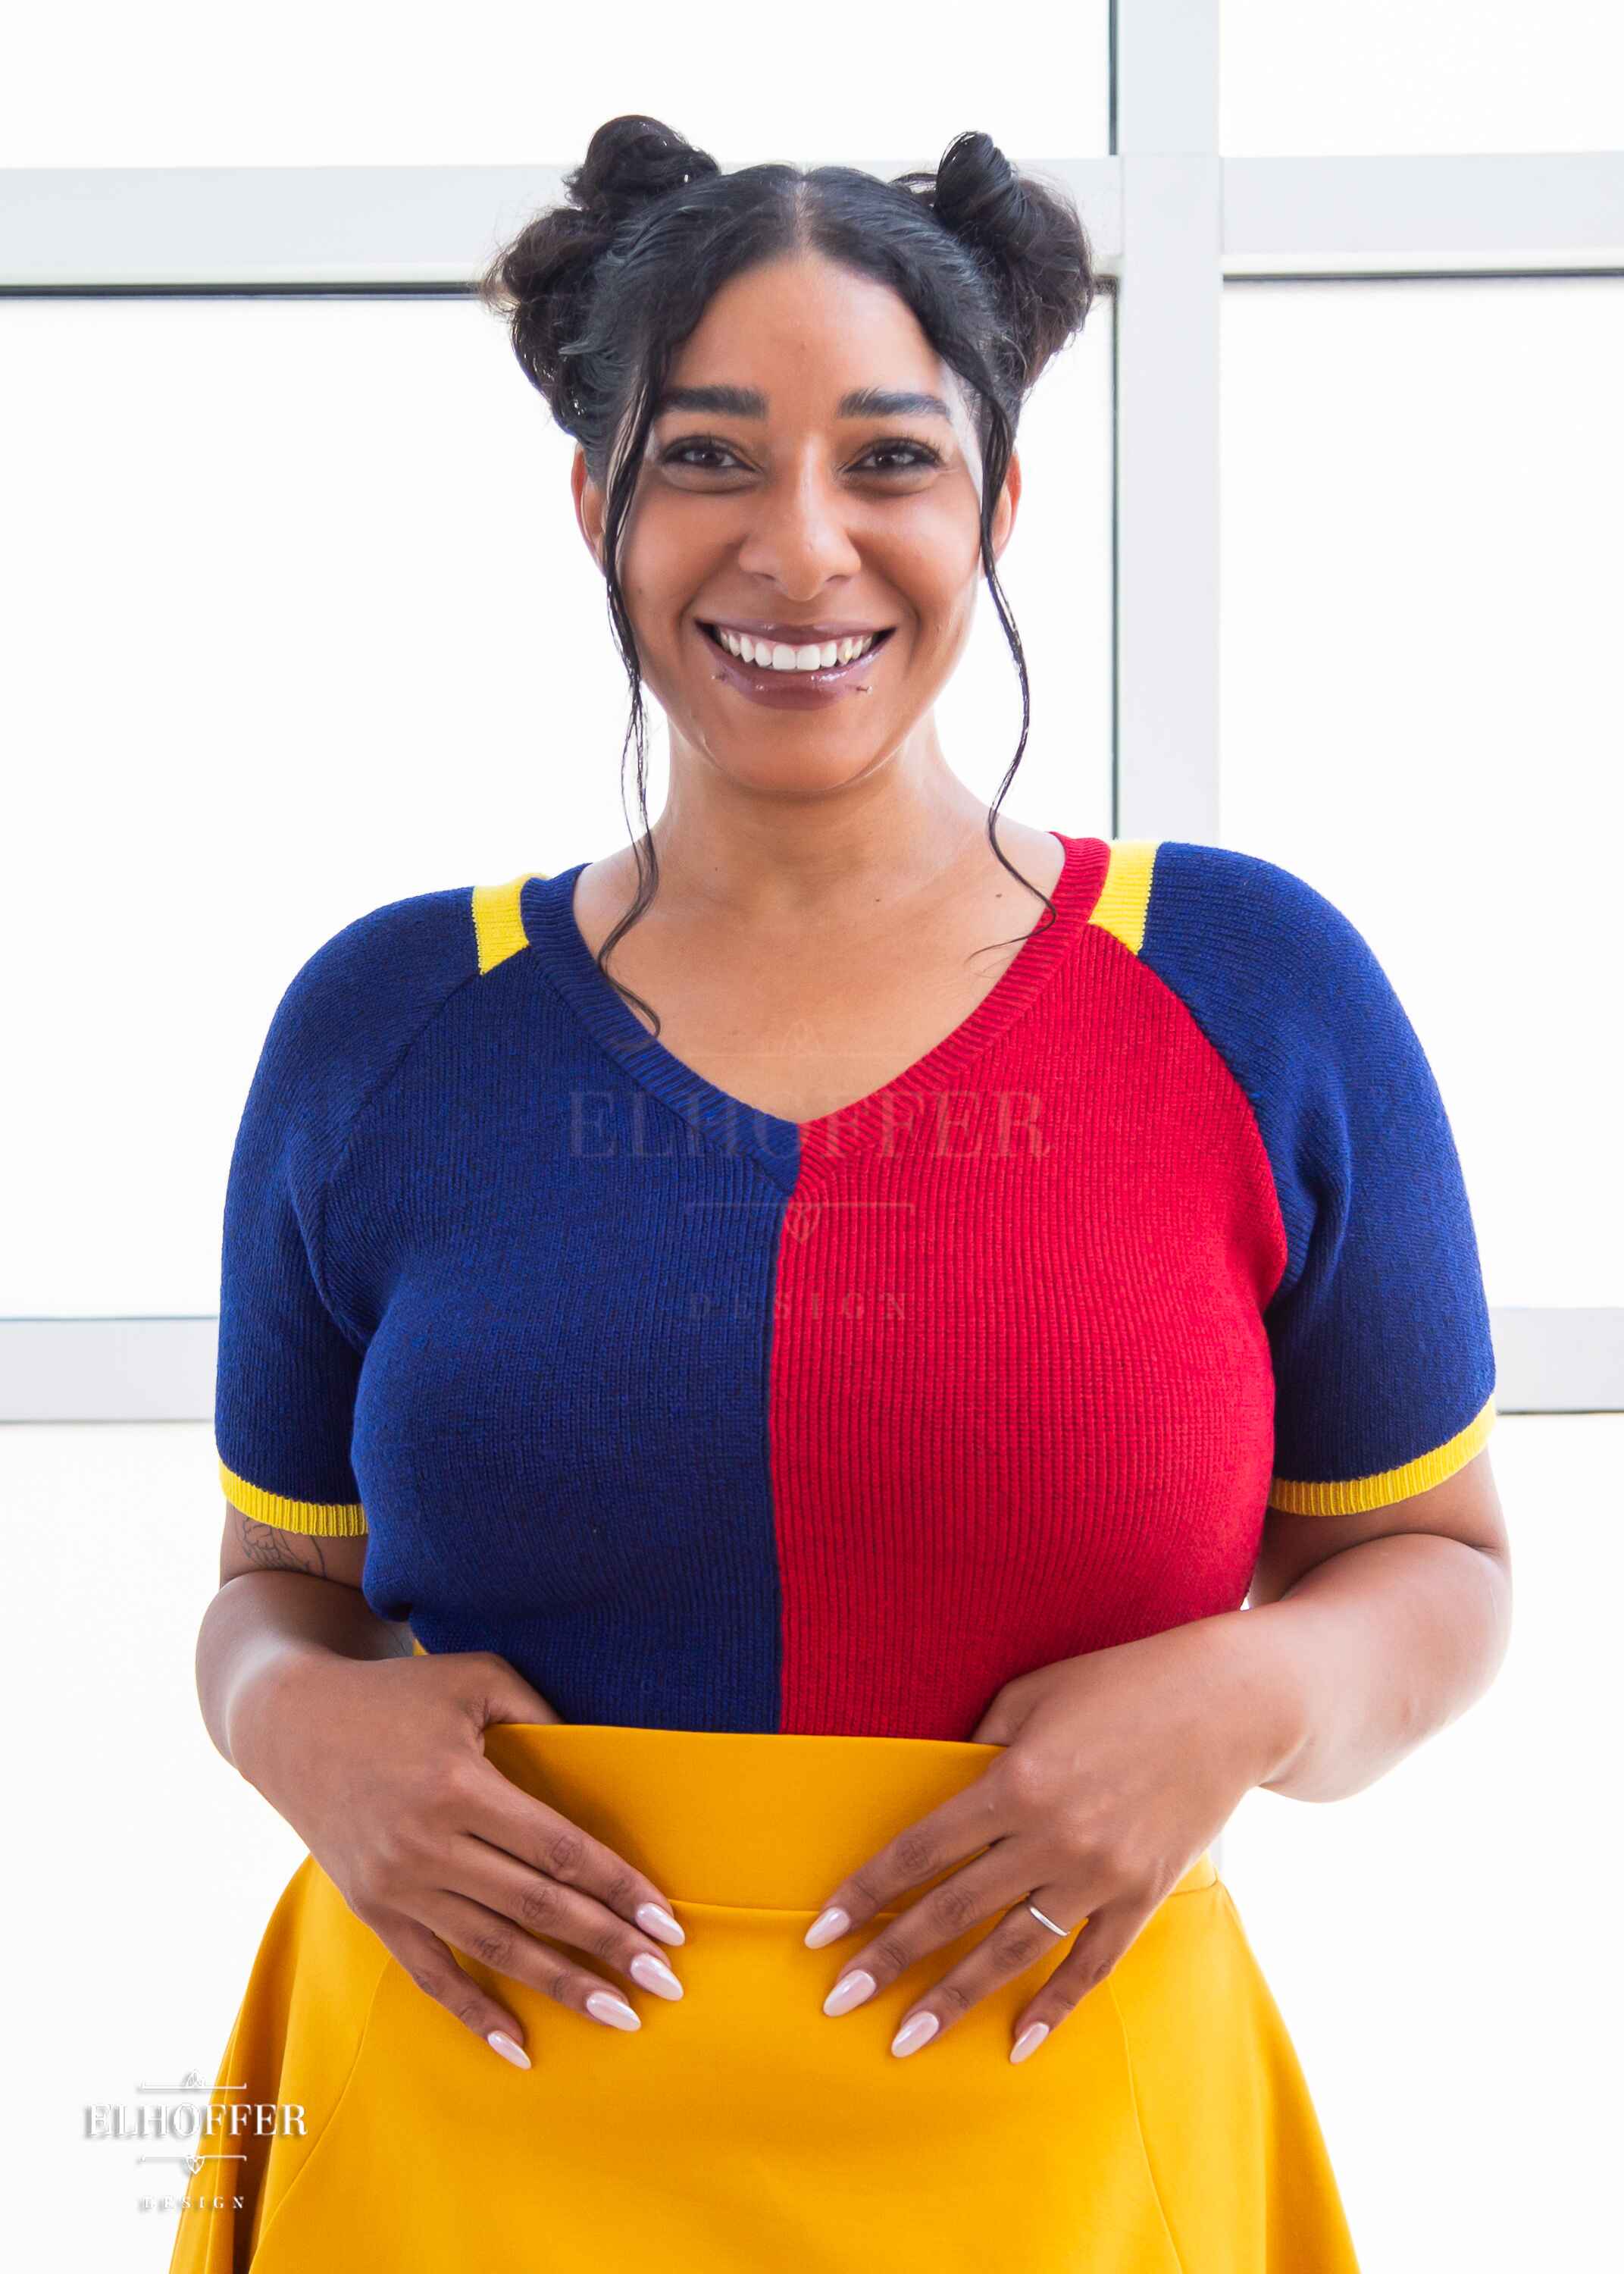 Janae, a light brown skinned L model with dark brown hair in space buns, is smiling while wearing a short sleeve knit top with alternating blue and red colors. There is yellow detailing along the top of the shoulder and around the cuff of the sleeve. She paired the knit top with a golden yellow knee length high low skirt.